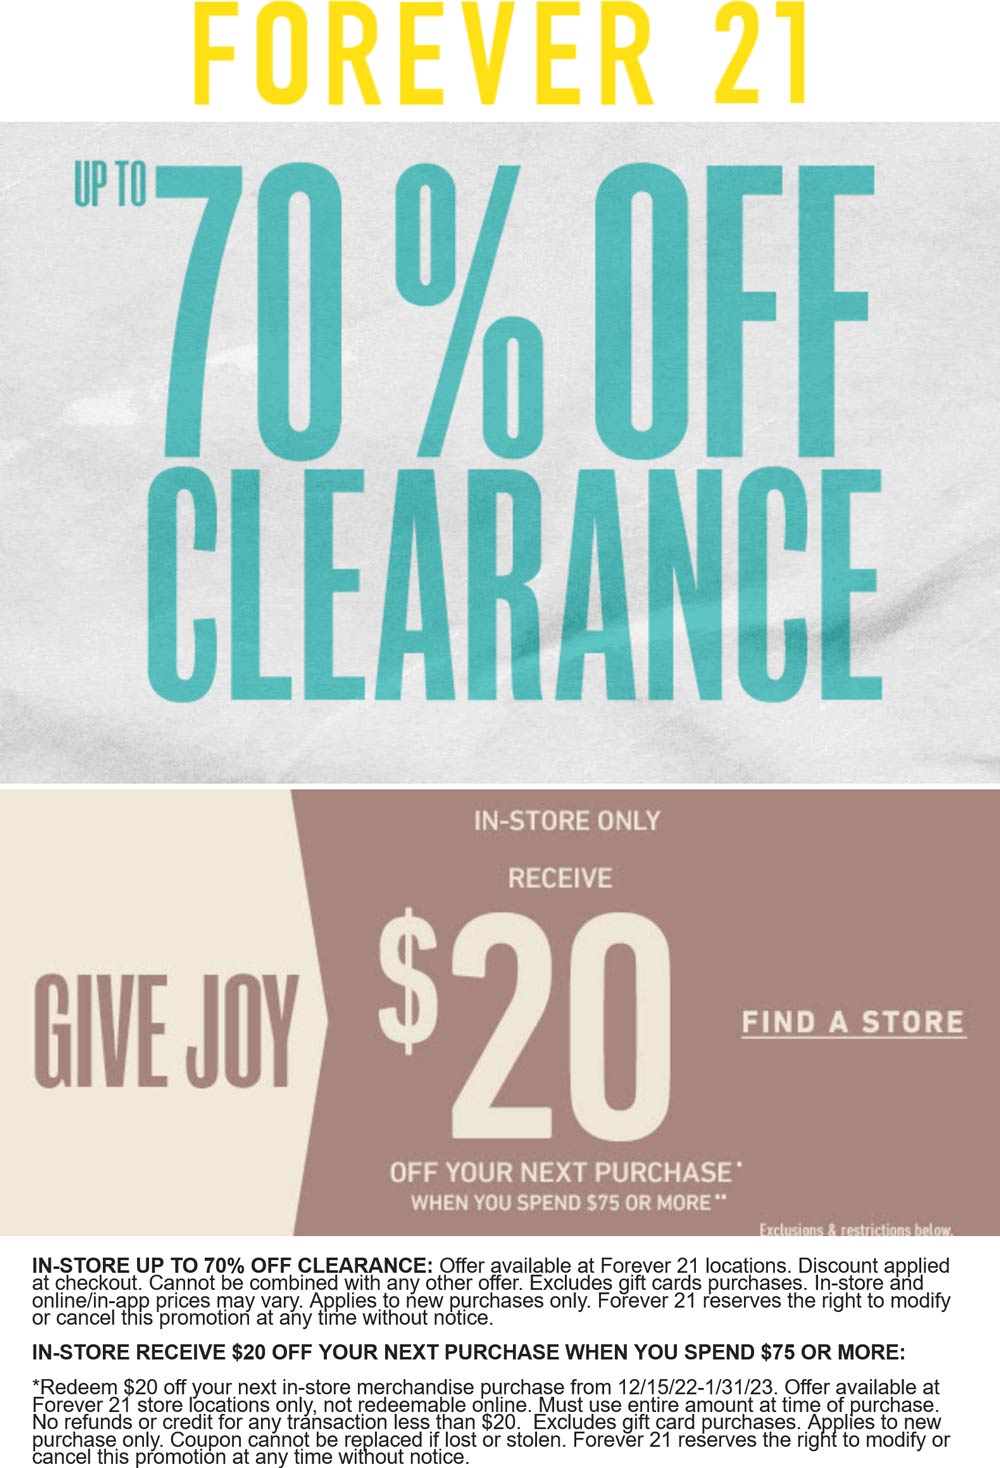 Forever 21 stores Coupon  $20 off $75 at Forever 21 #forever21 